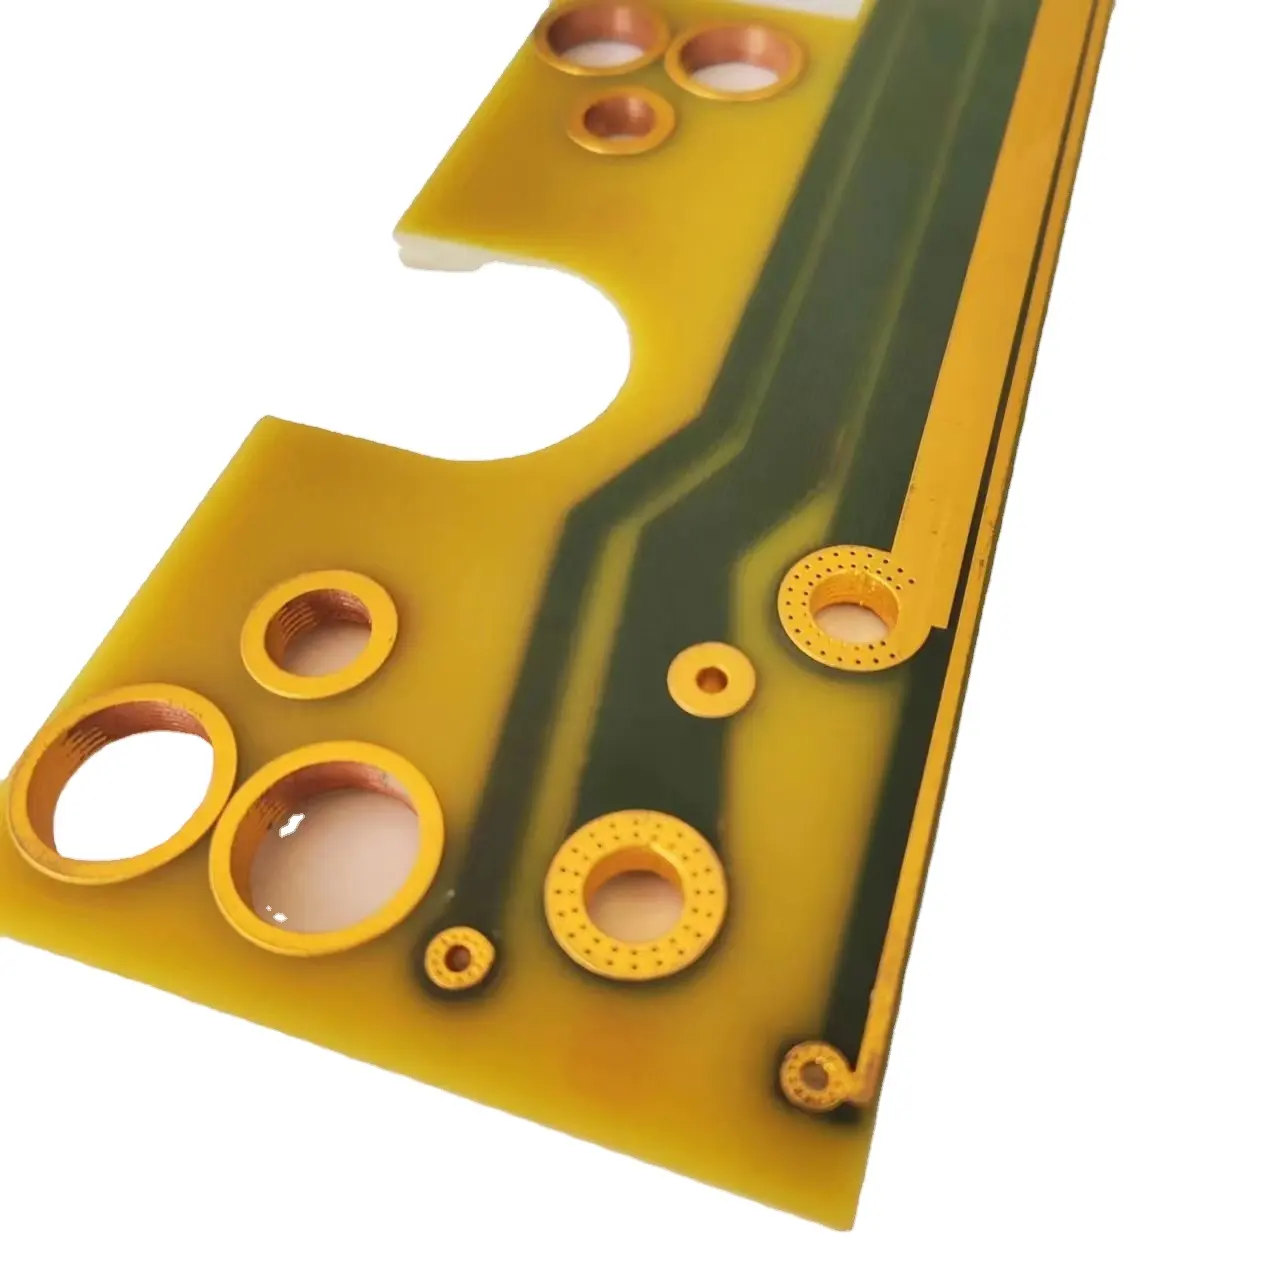 Heavy copper thickness Multilayer Pcb Circuit Board Professional Manufacturer Pcb product in Shenzhen